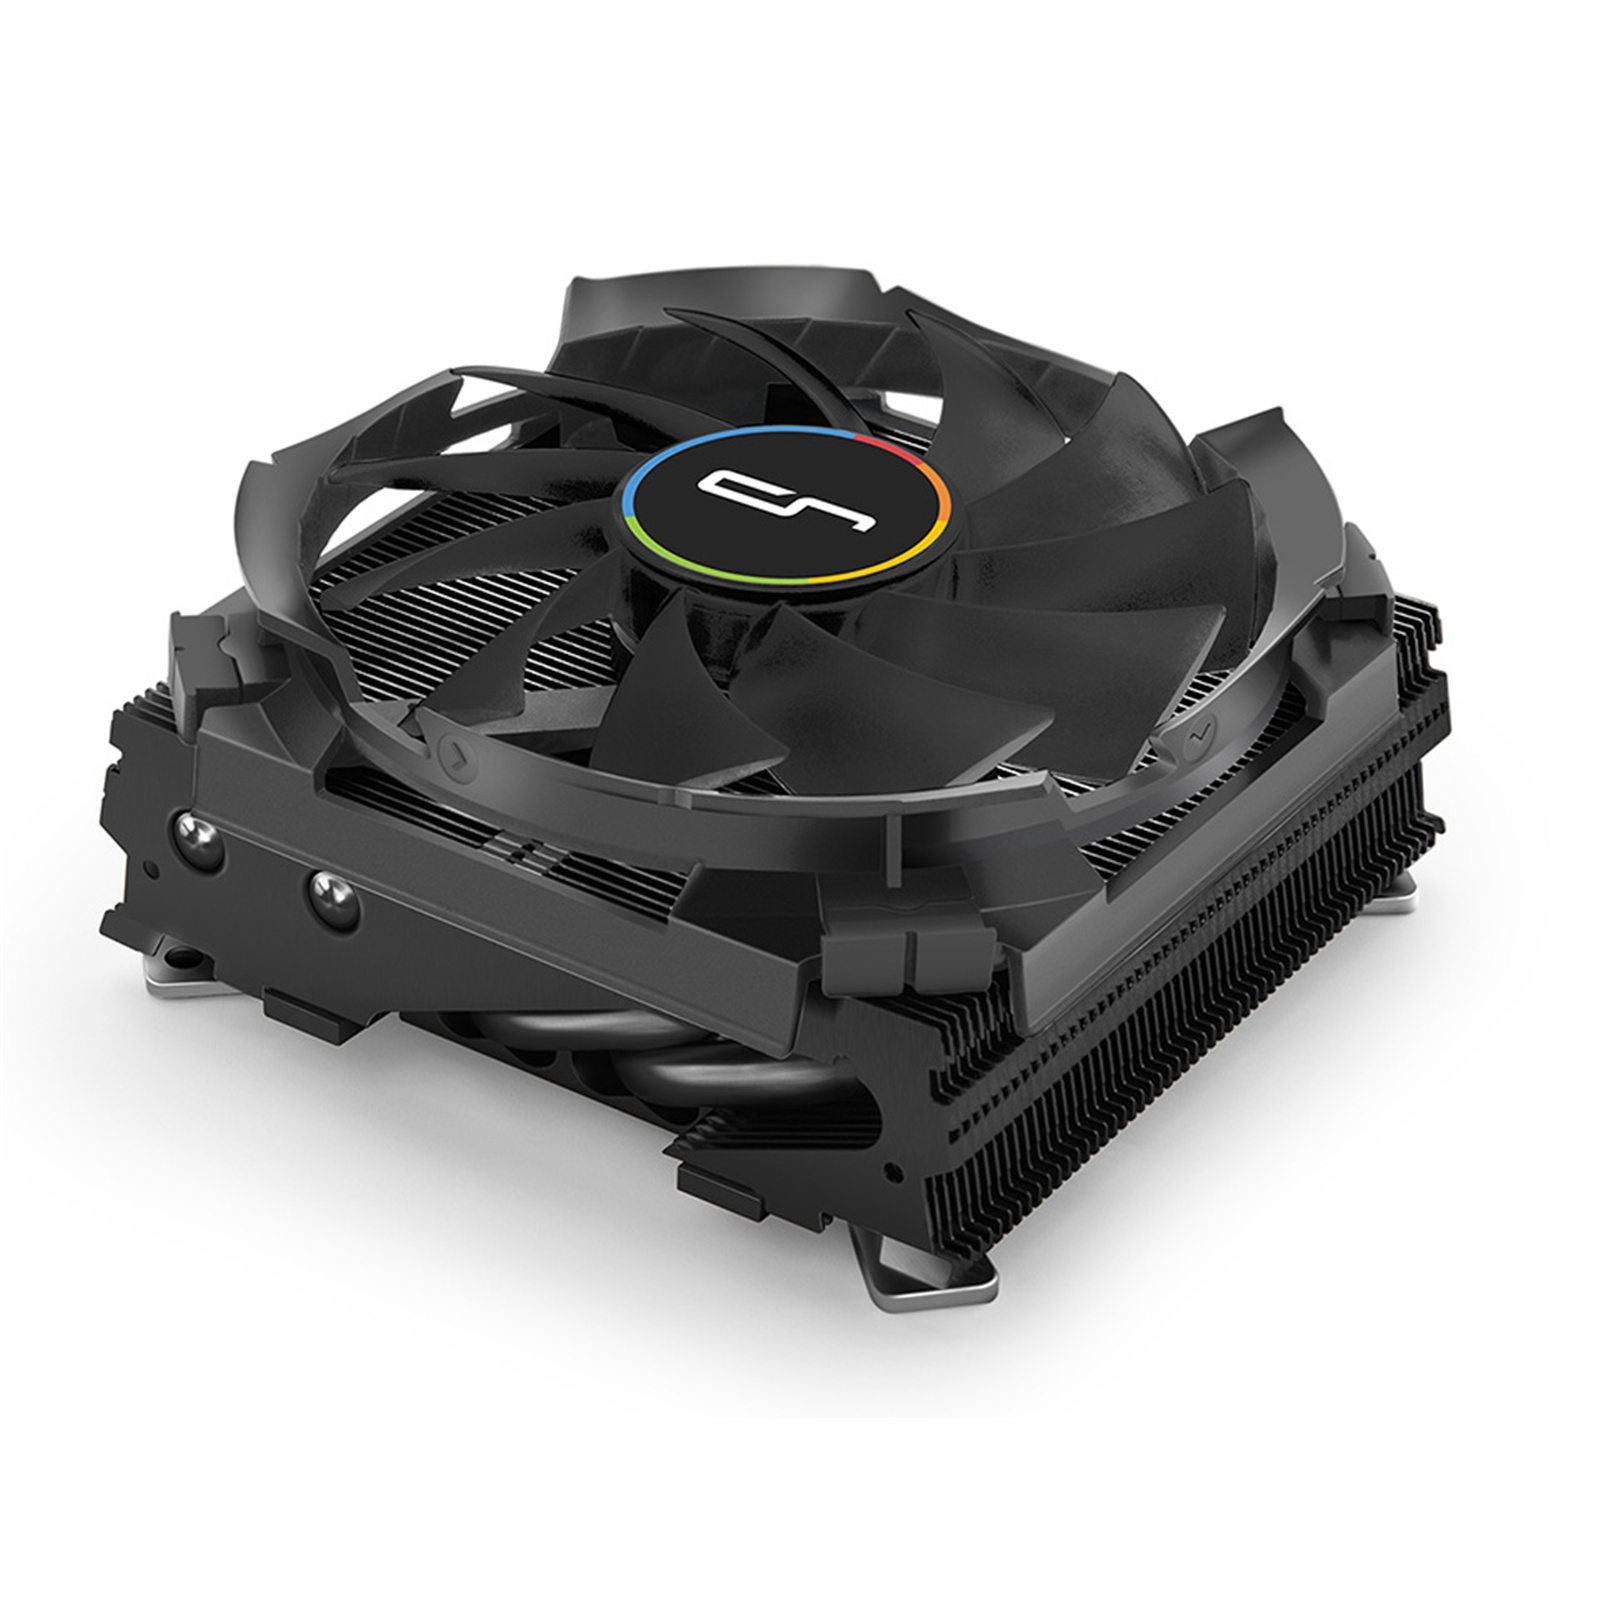 Buy the CRYORIG C7 Copper Top Flow Low Profile CPU Cooler with Full Copper...  ( CR-C7G ) online - PBTech.com